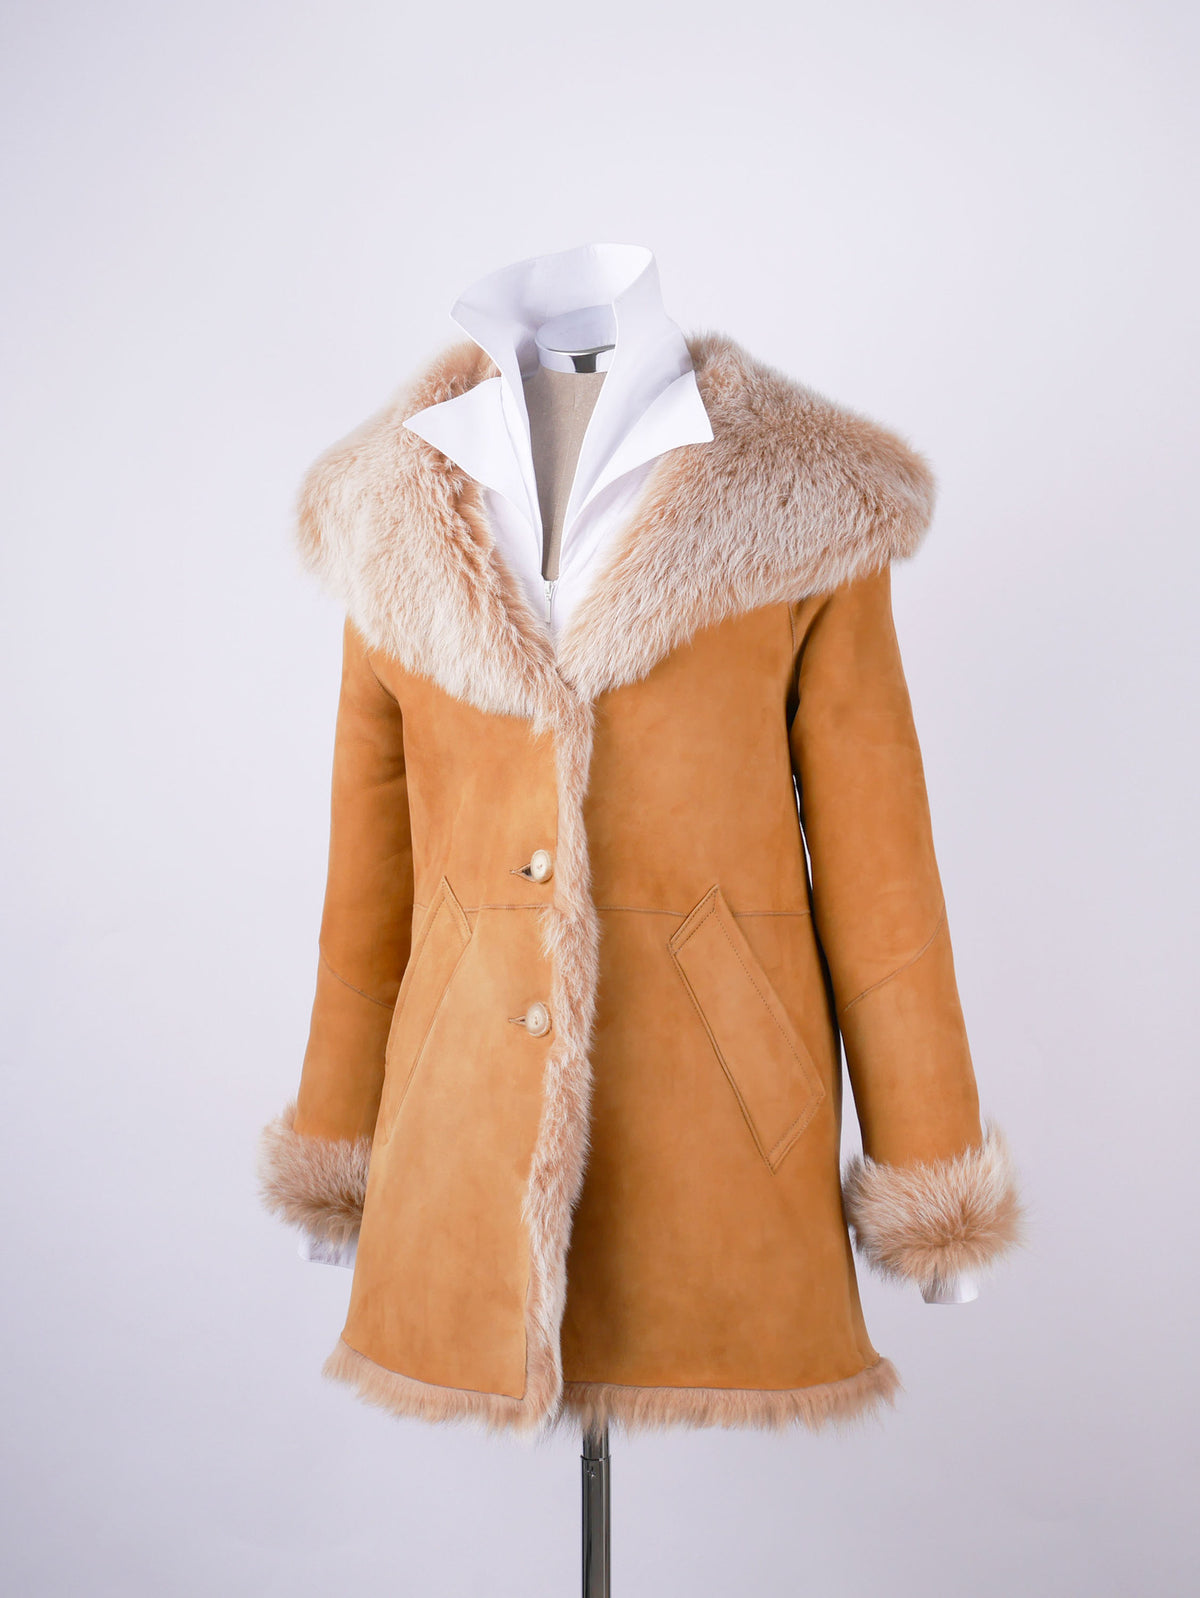 The Shearling